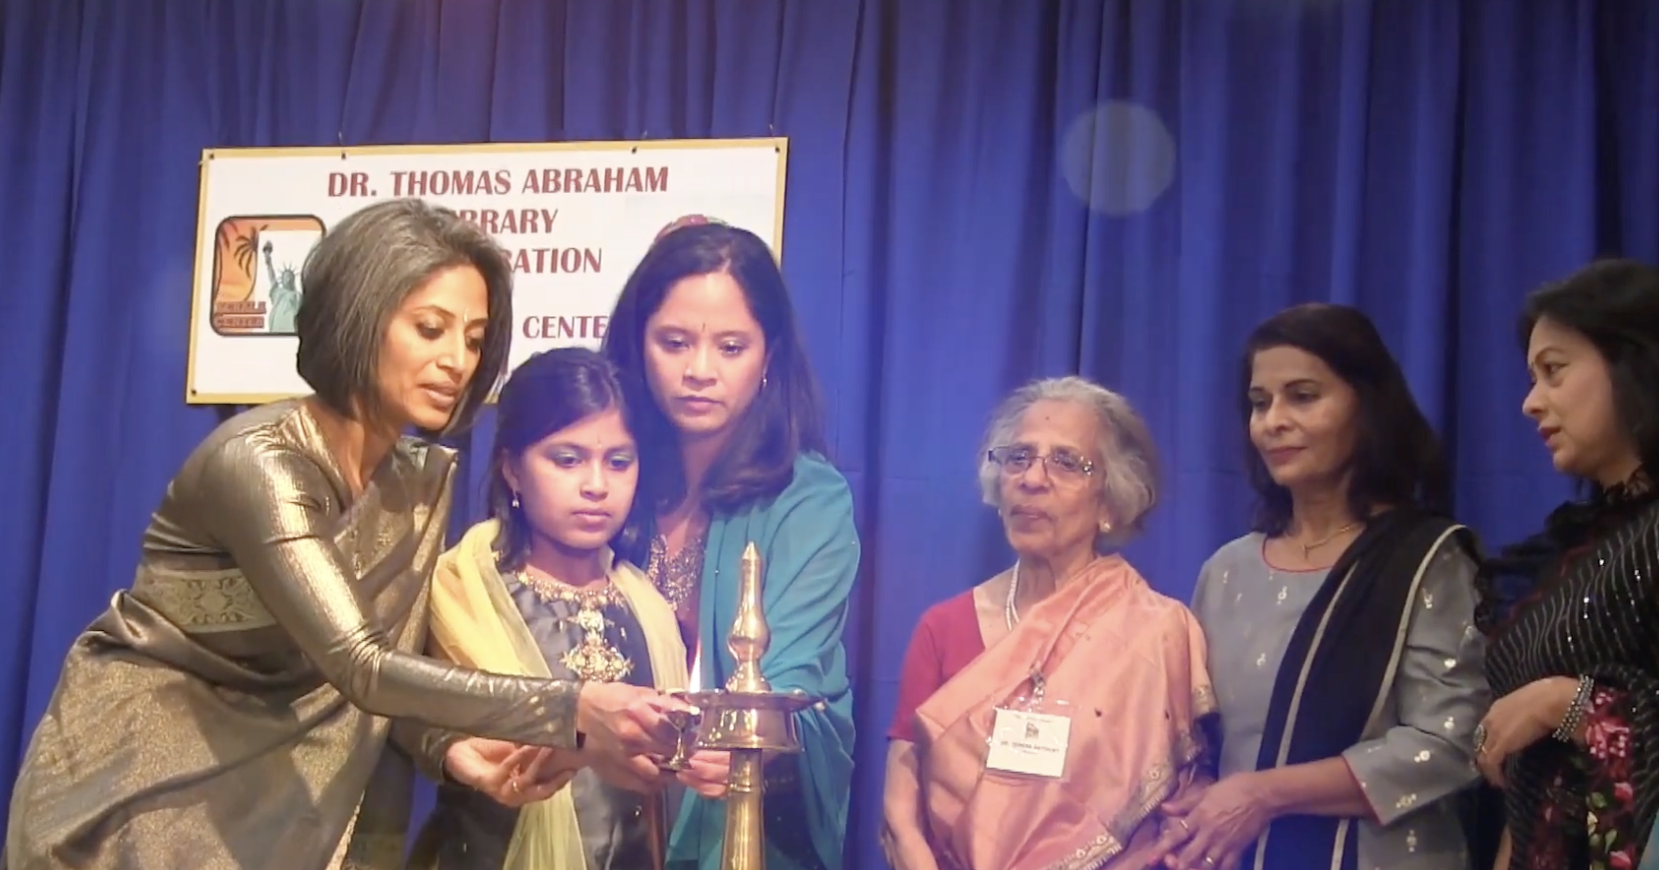 Dr. Thomas Abraham Library opens at Kerala Center in New York